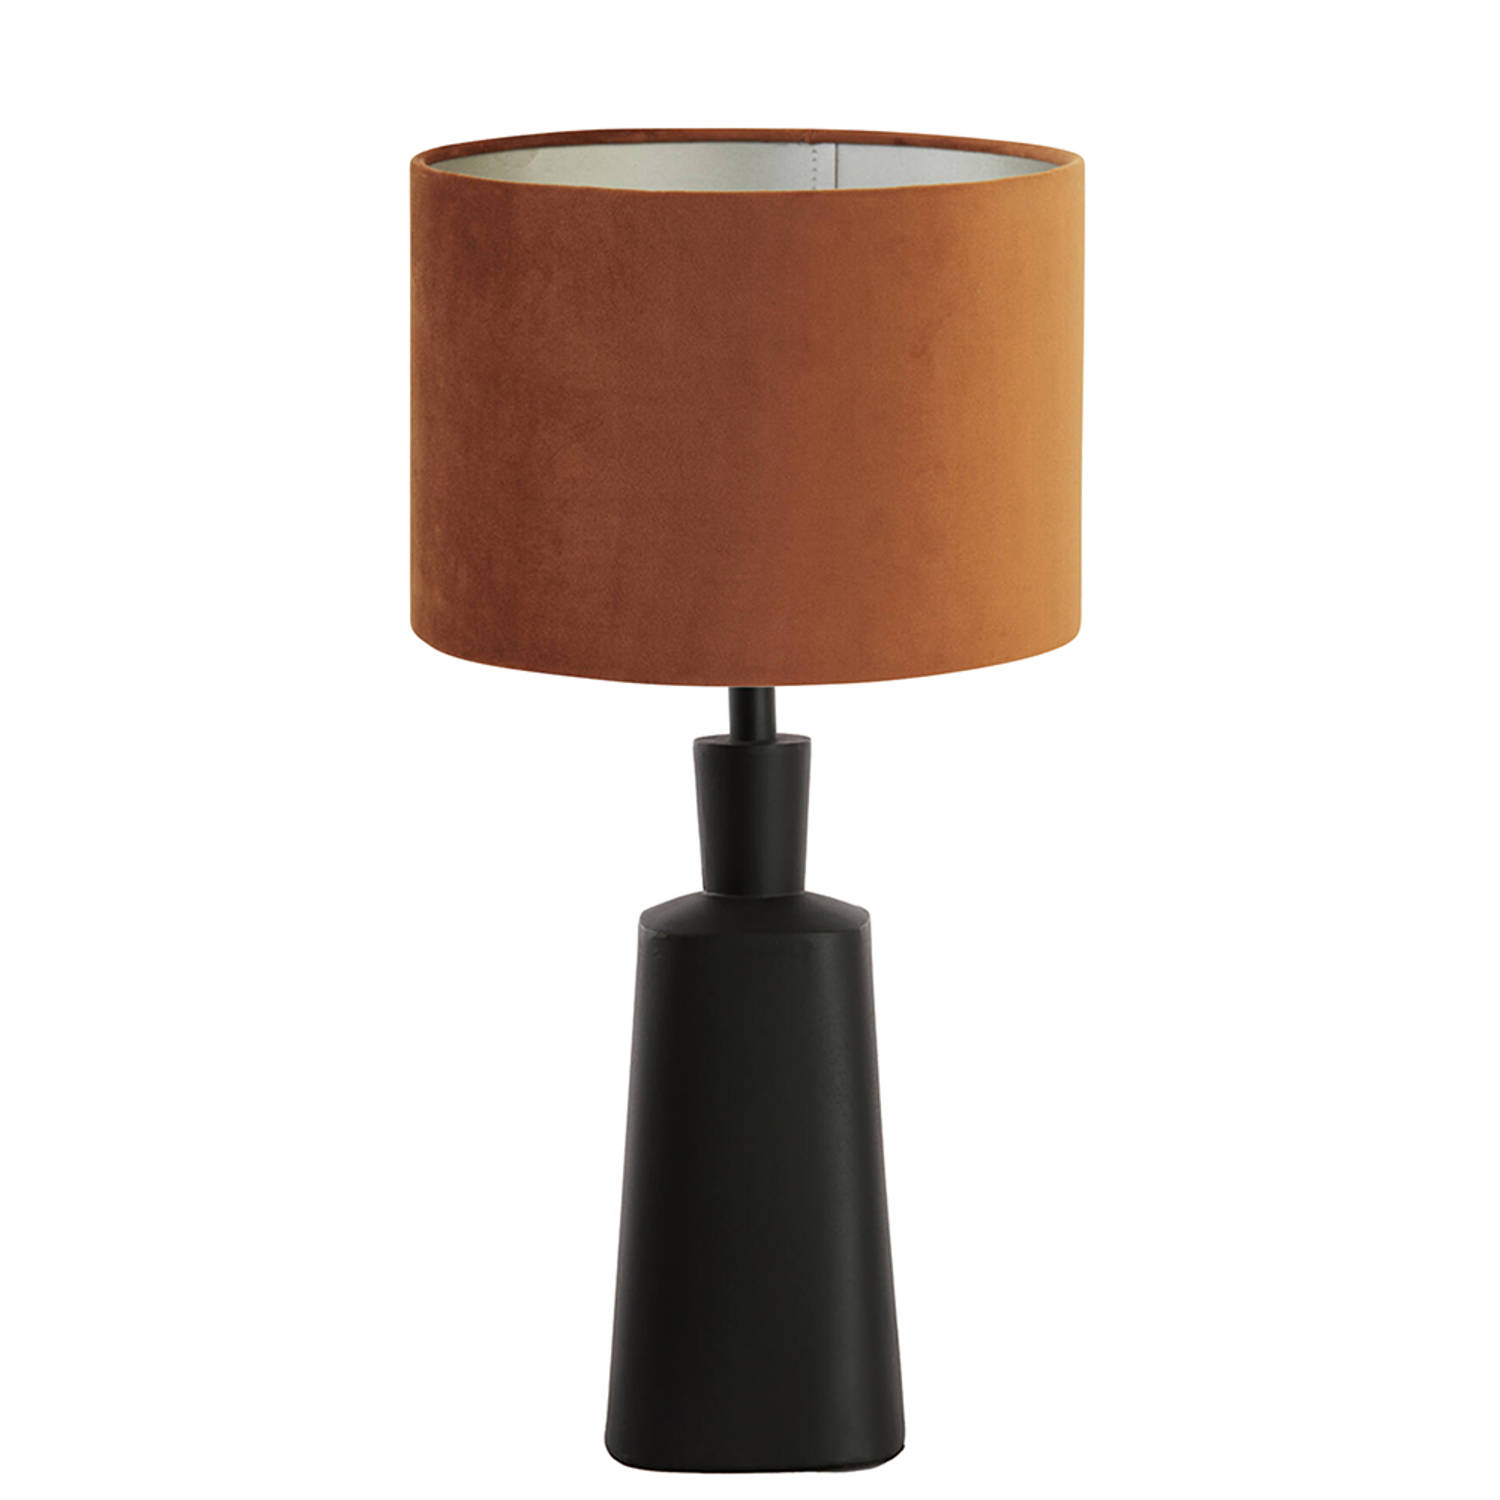 Light and Living Donah tafellamp - Ø 30 cm - E27 (grote fitting) - rood